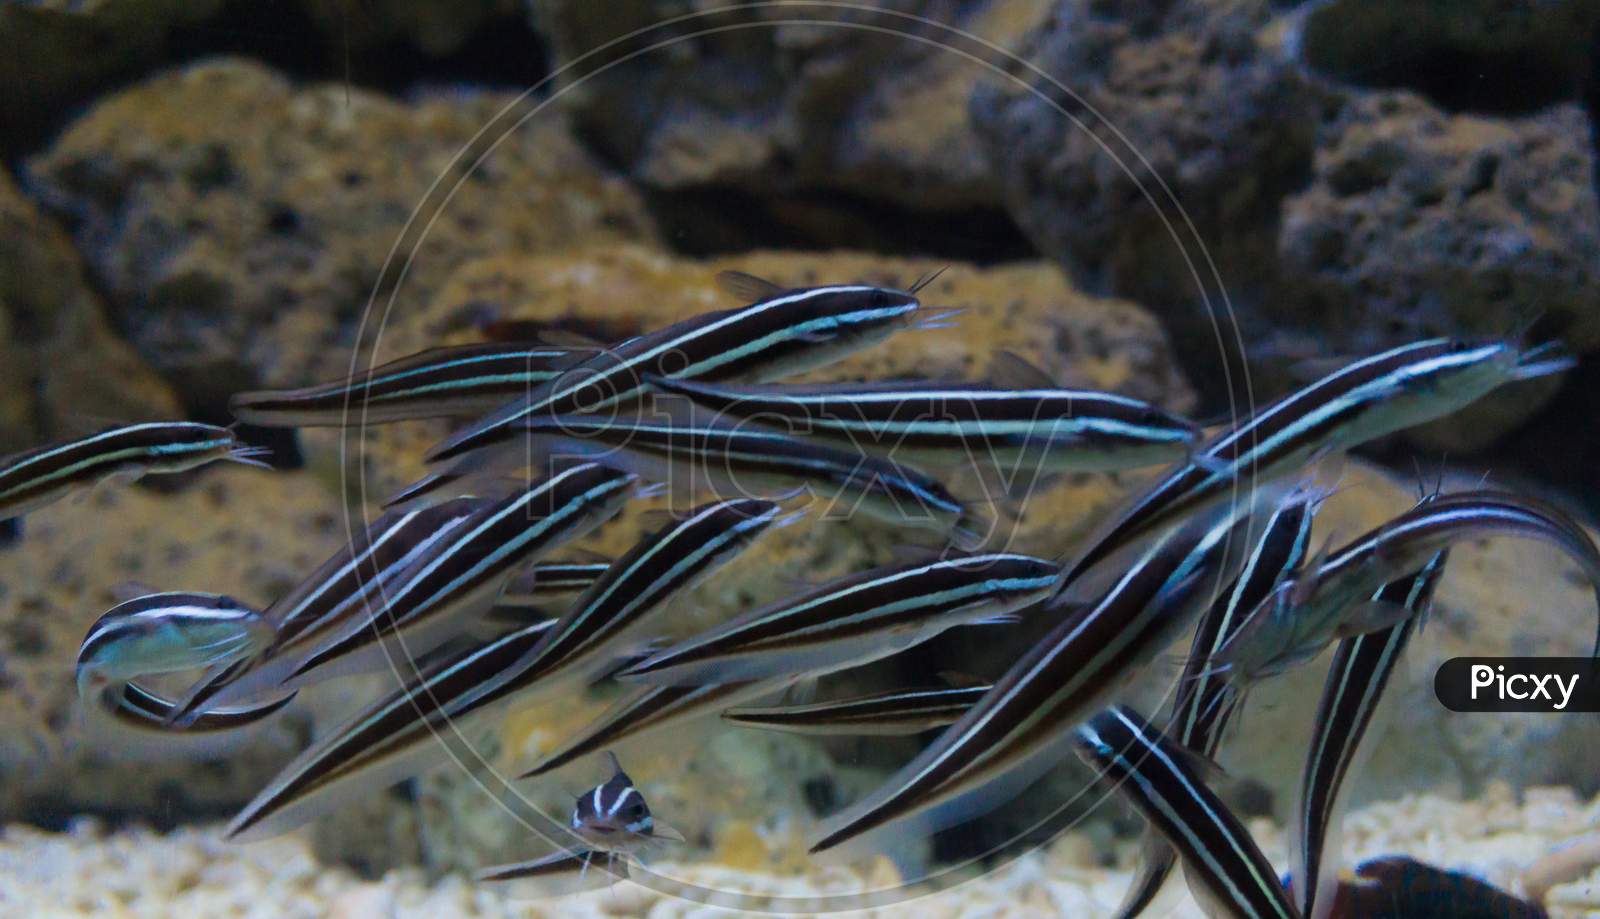 Group of salt water cleaner fish